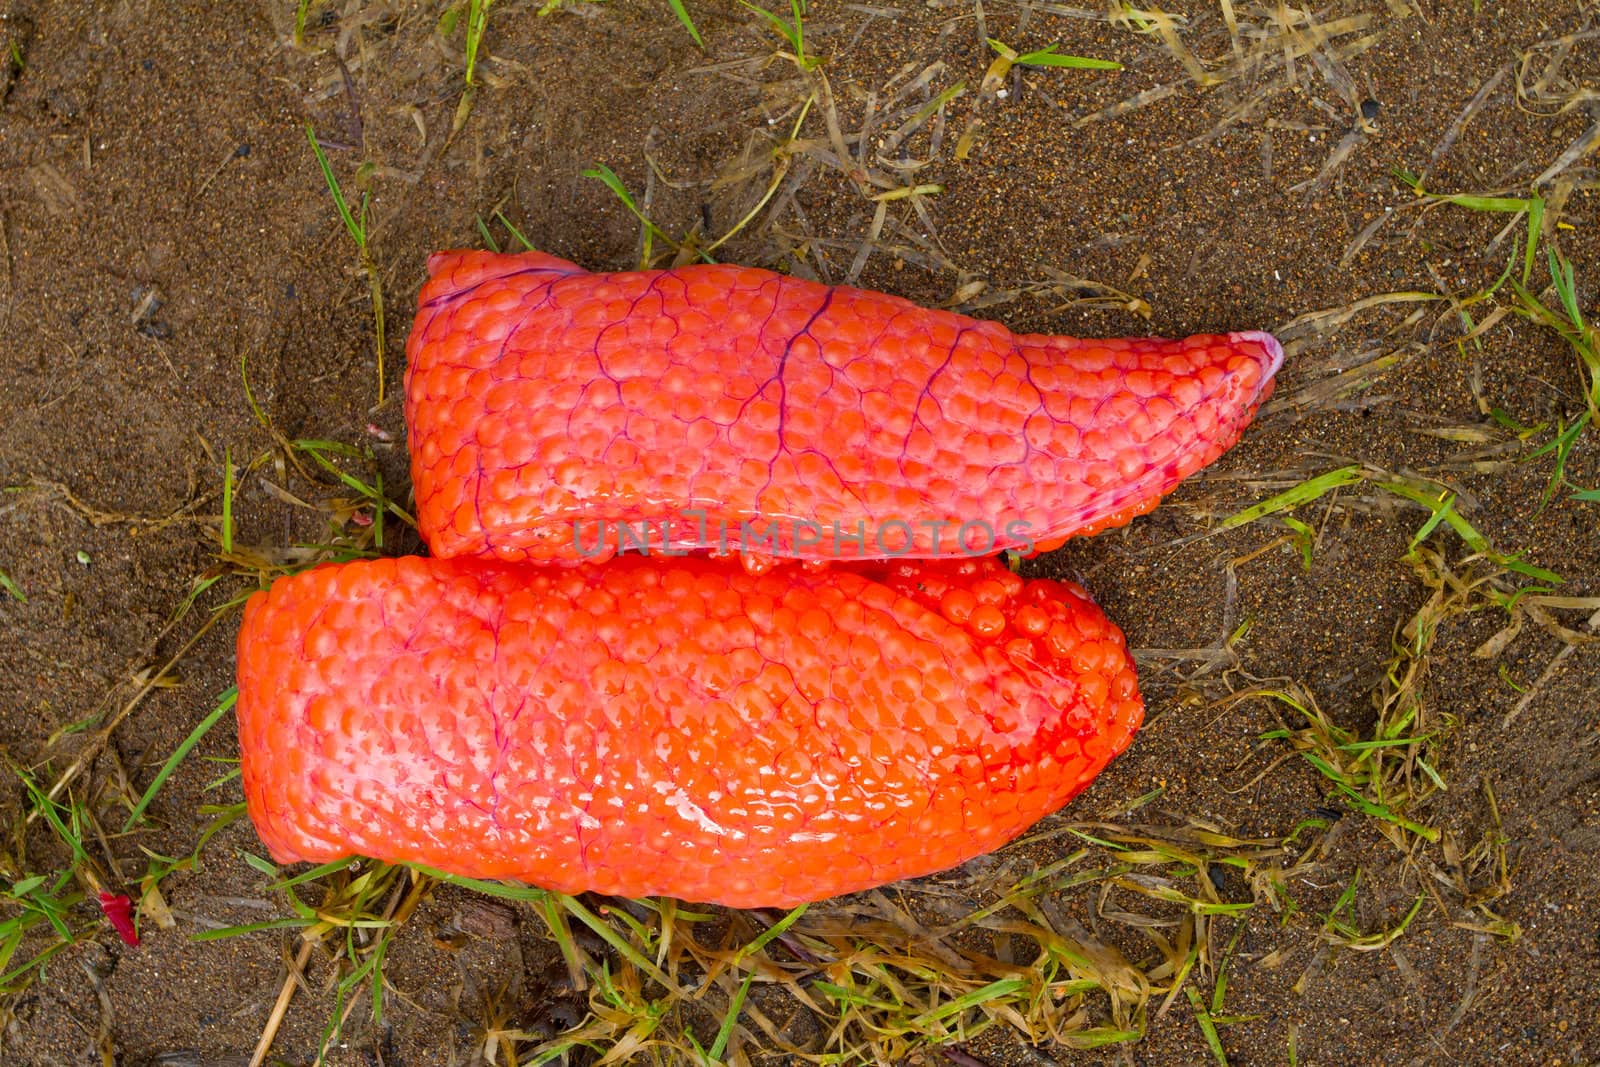 Steelhead salmon roe is shown in tact on the river bank after a fisherman guts and cleans a freshly caught winter steelhead in Oregon.